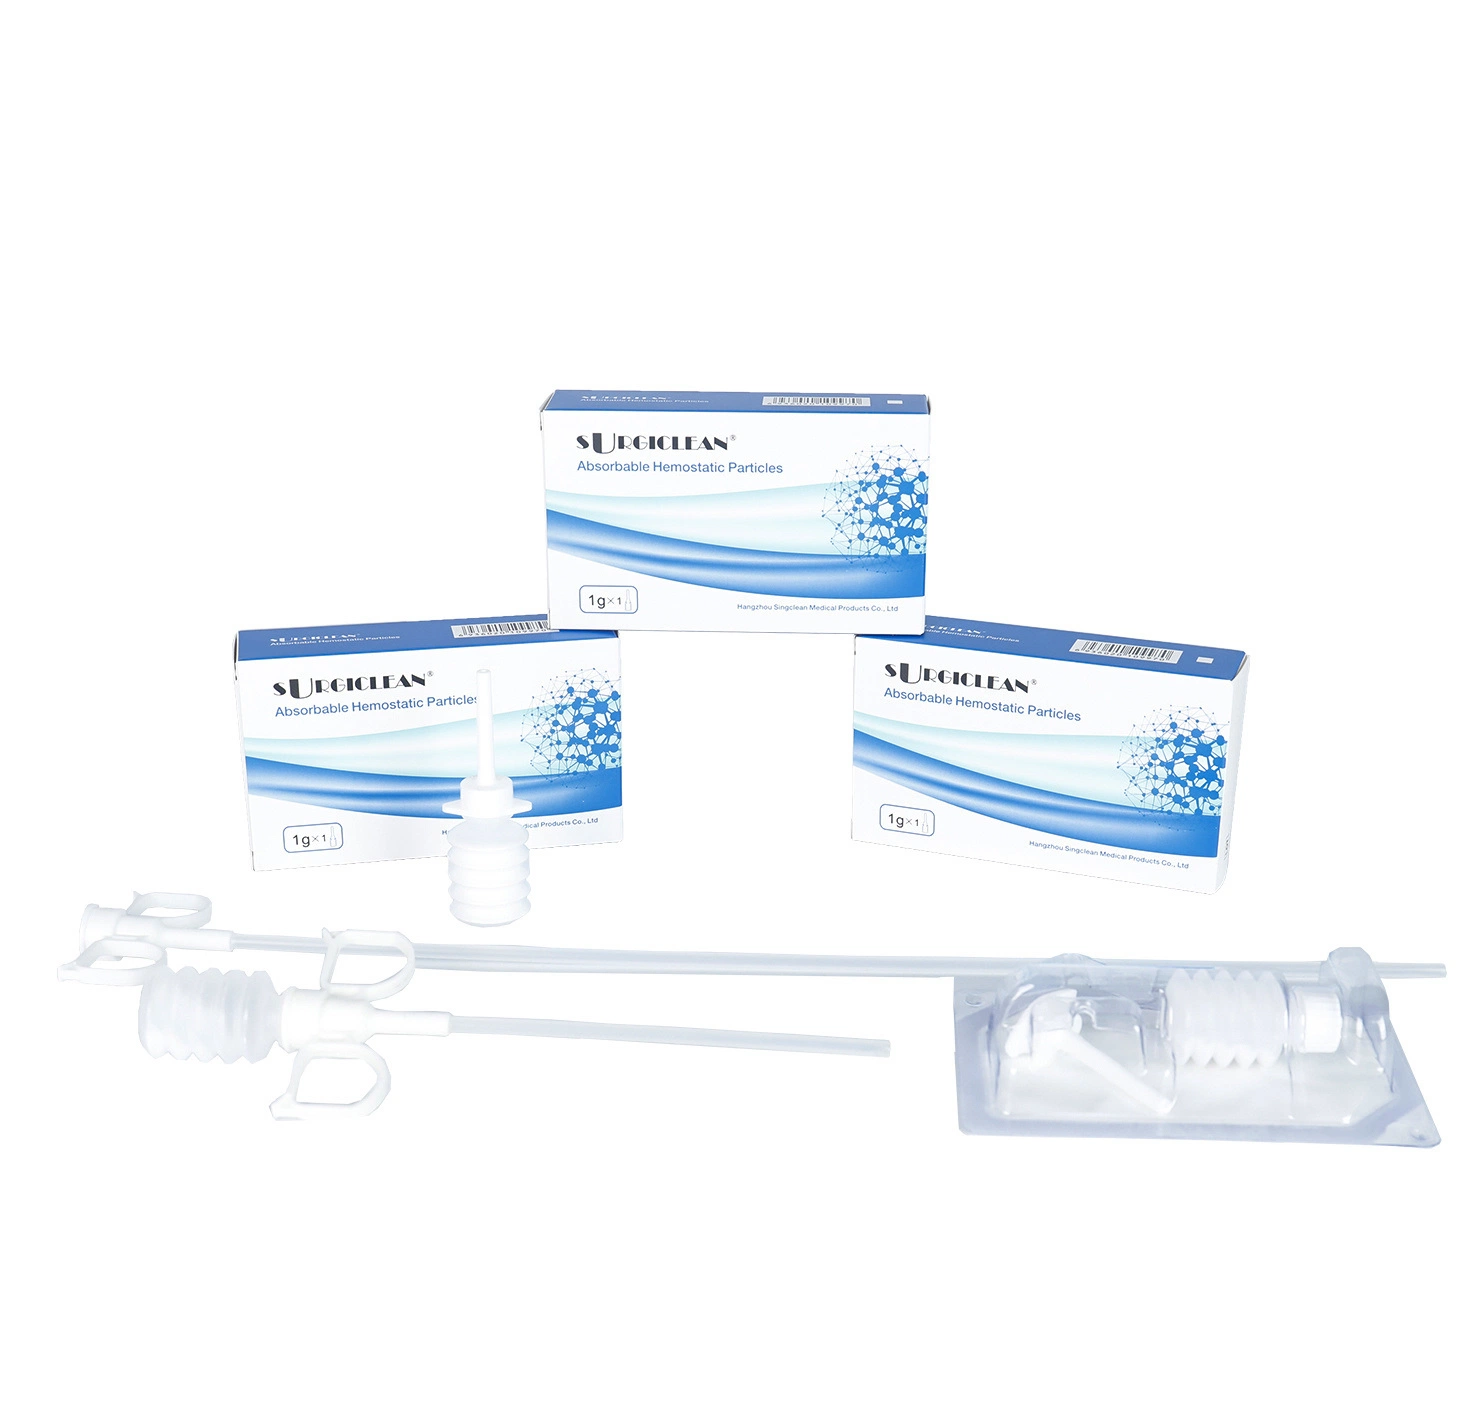 Surgiclean Mph Absorbable Hemostatic Particles with CE Certificate